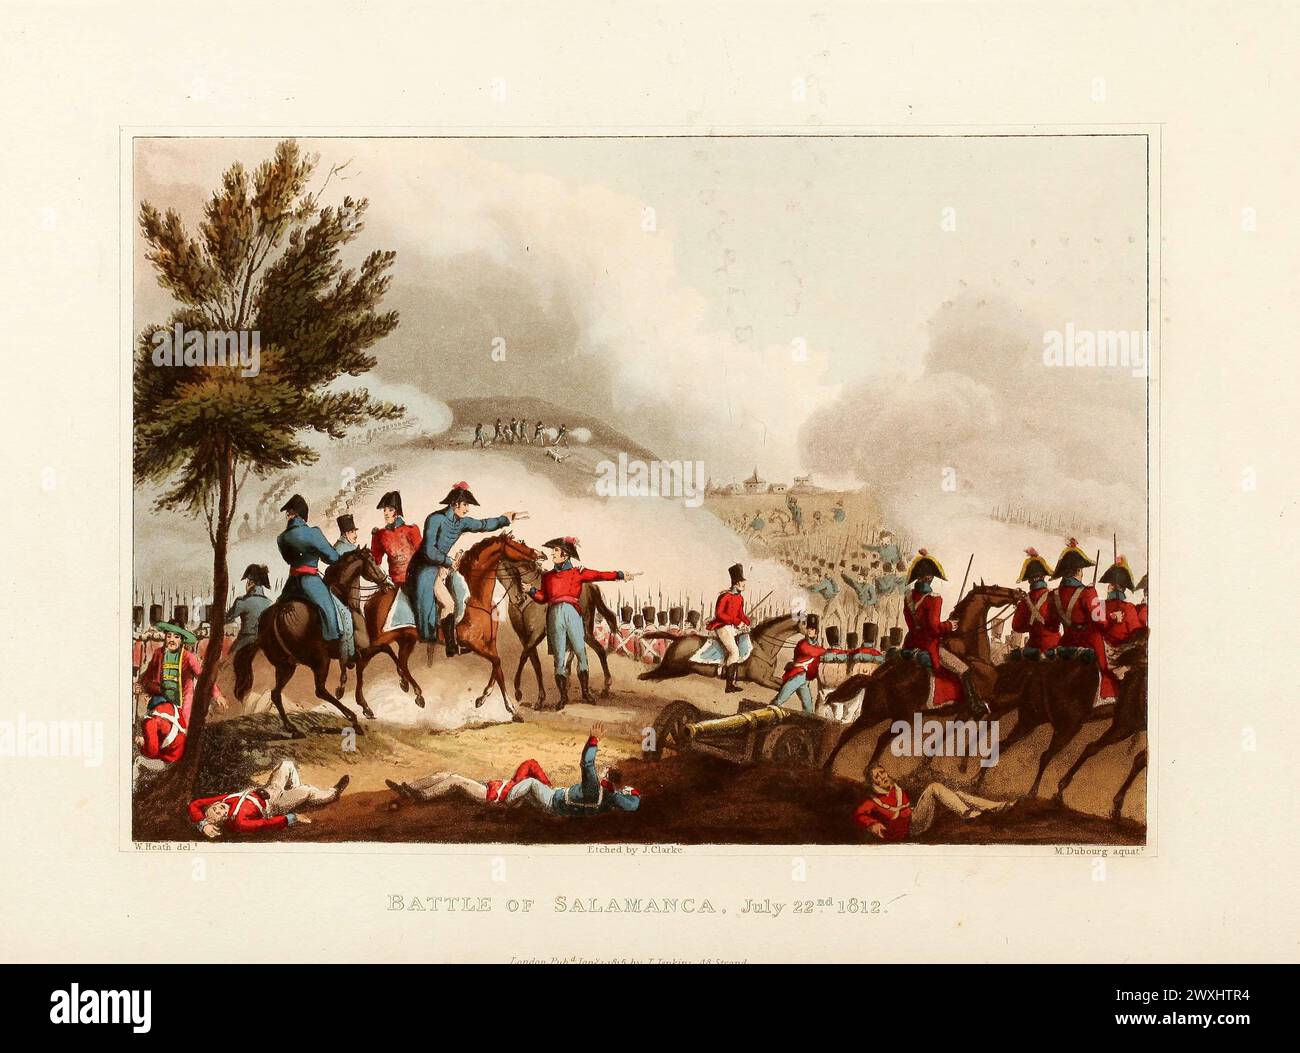 Battle of Salamanca, July 22, 1812. Vintage Coloured Aquatint, published by James Jenkins, 1815,  from  The martial achievements of Great Britain and her allies : from 1799 to 1815. Stock Photo